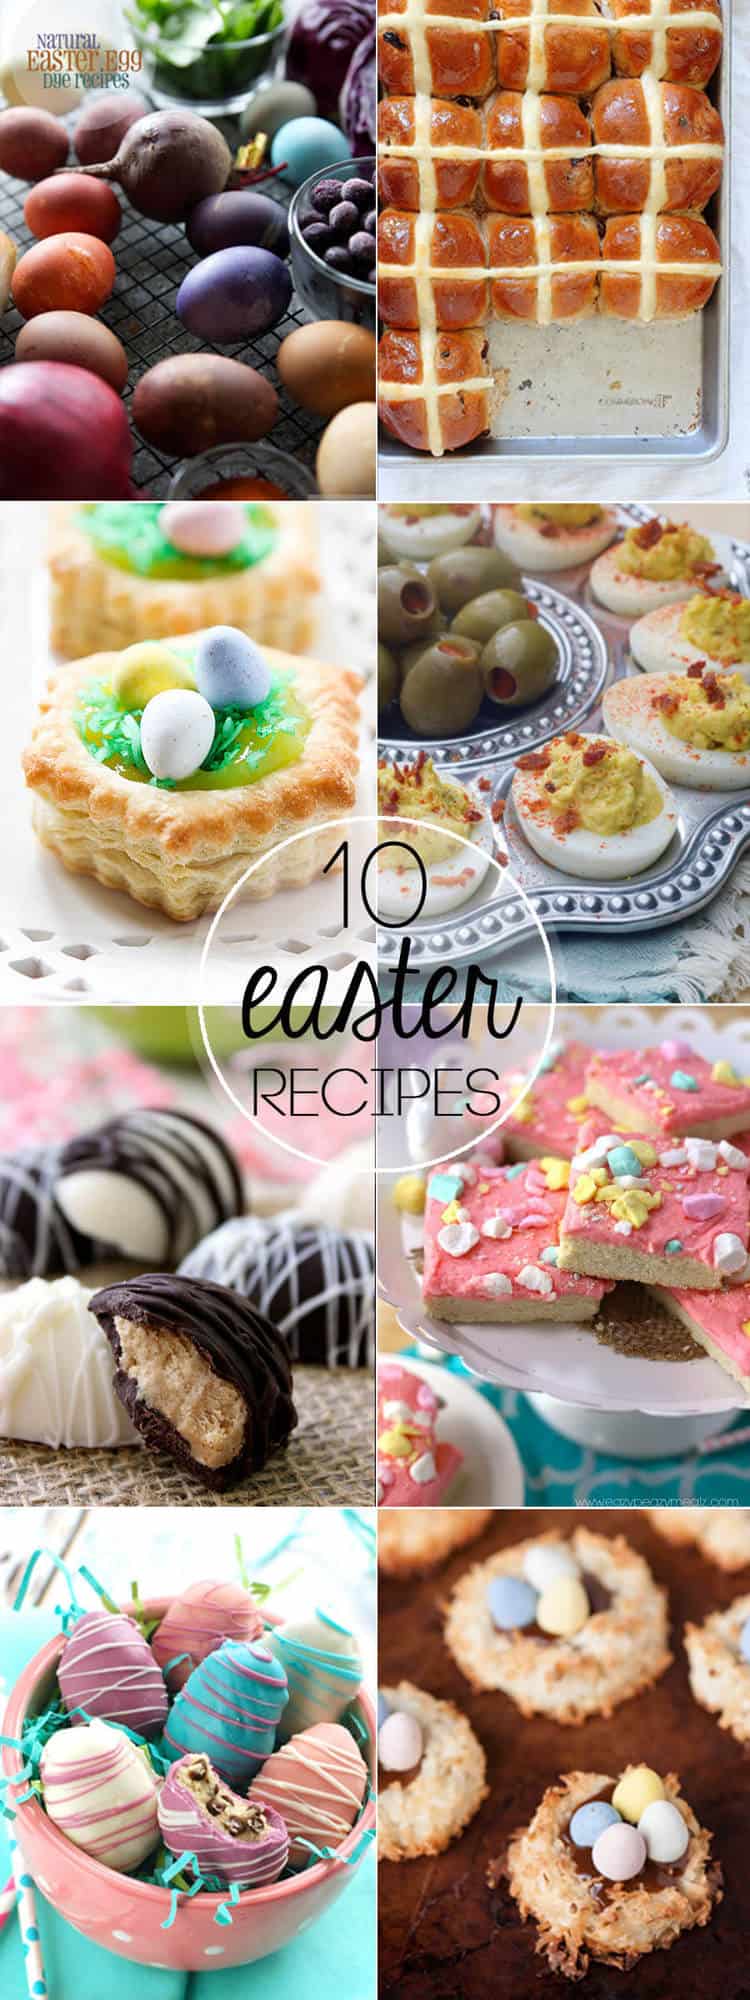 A vertical collage of food images with overlay text - 10 Easter Recipes.